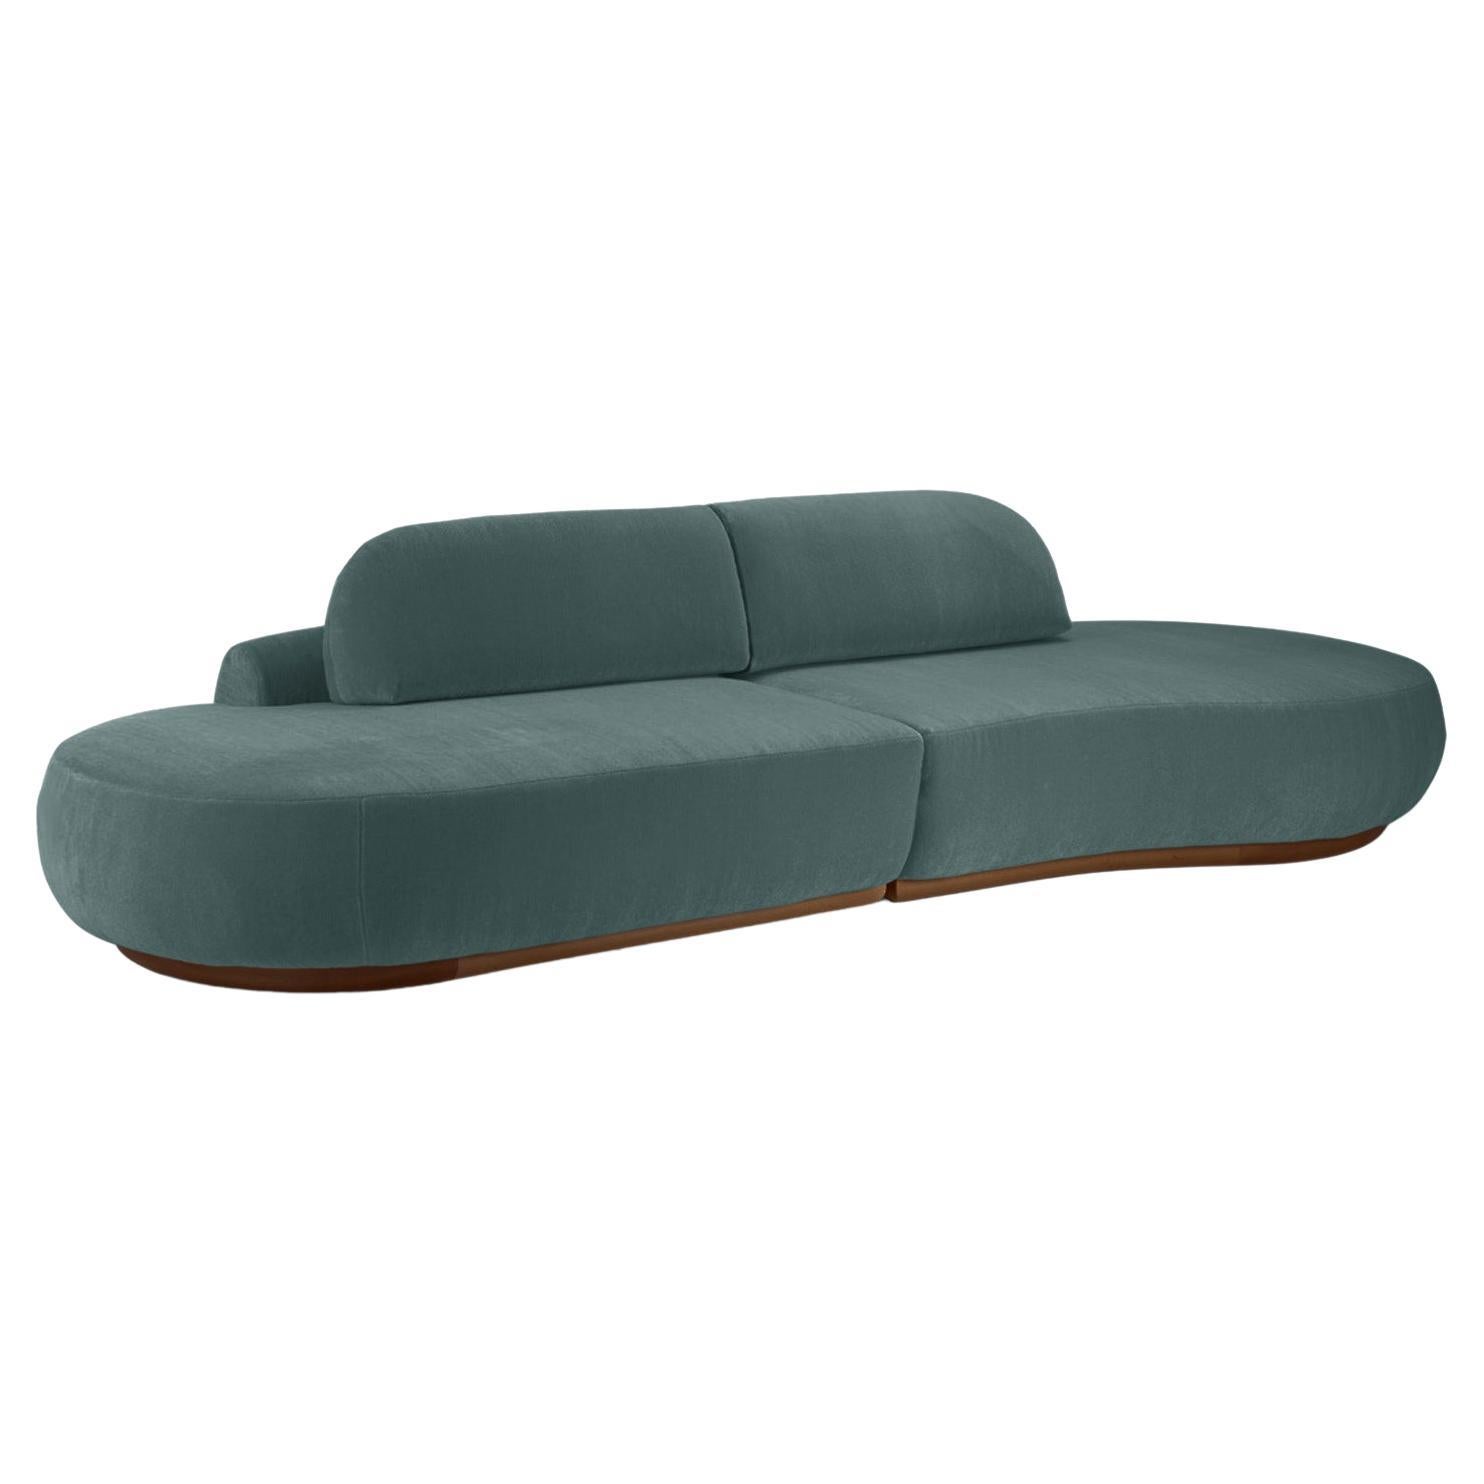 Naked Curved Sectional Sofa, 2 Piece with Beech Ash-056-1 and Teal For Sale